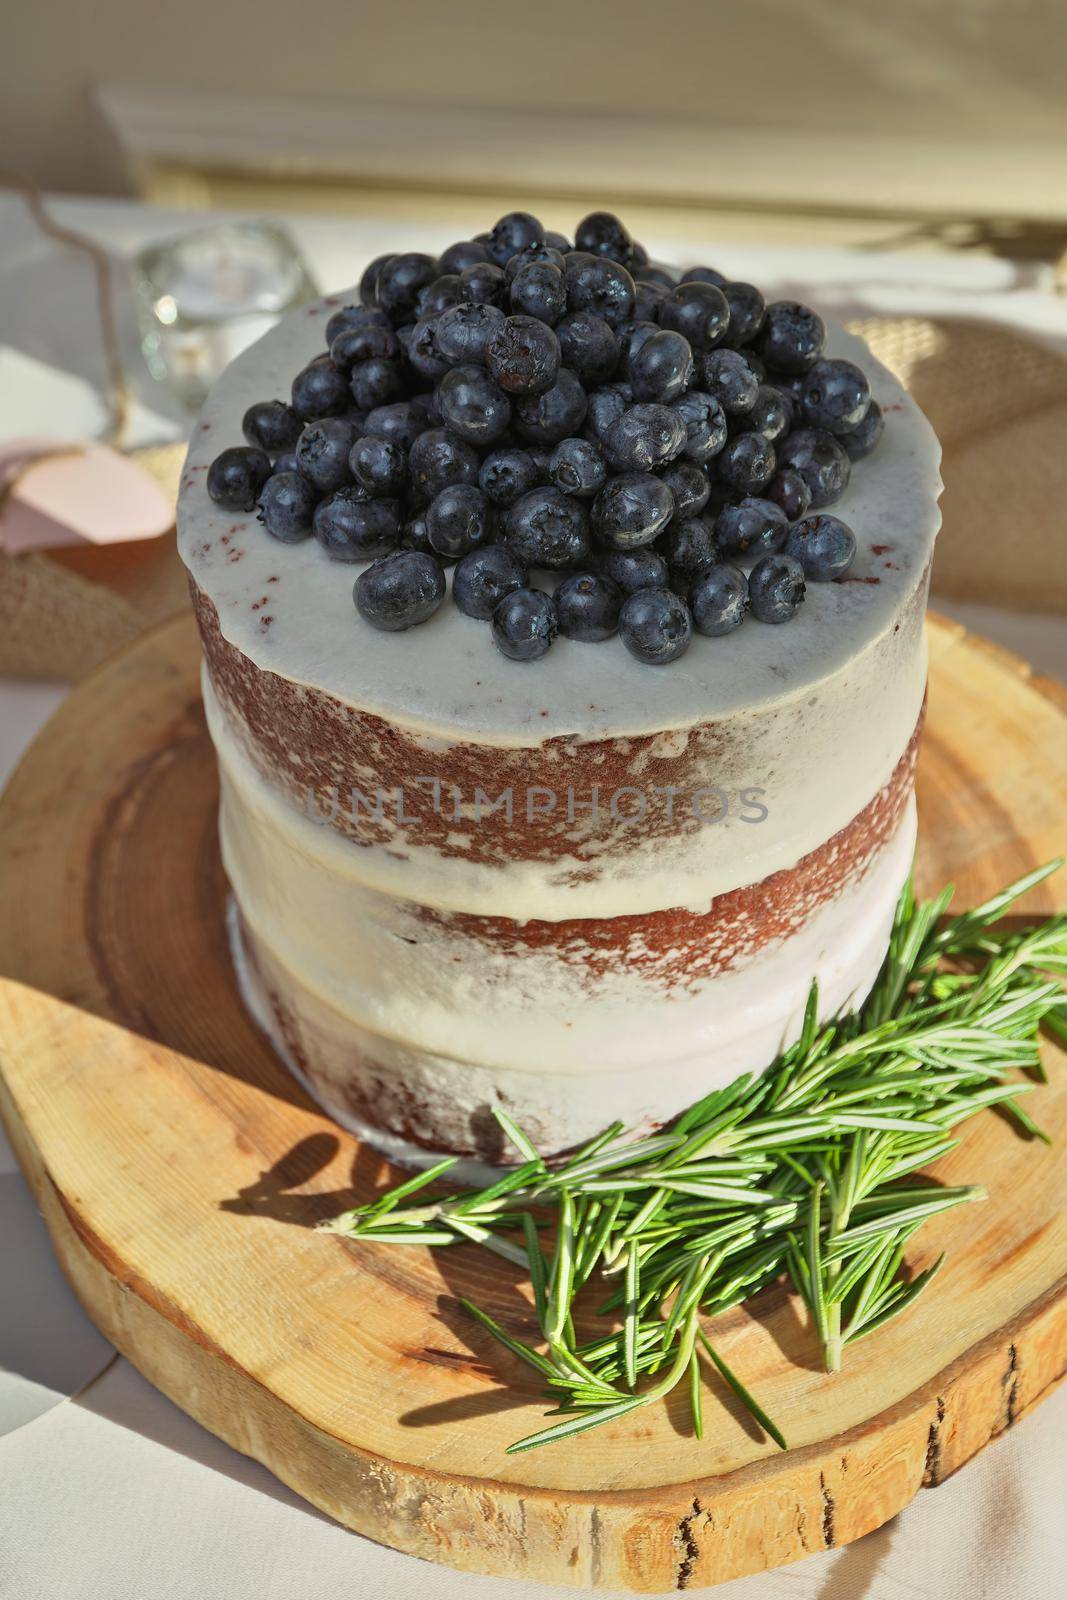 High Angle View of Rustic Homemade Naked Layered Wedding Cake with Vanilla Icing, Fresh Blueberries, and Rosemary, on Wood Slice